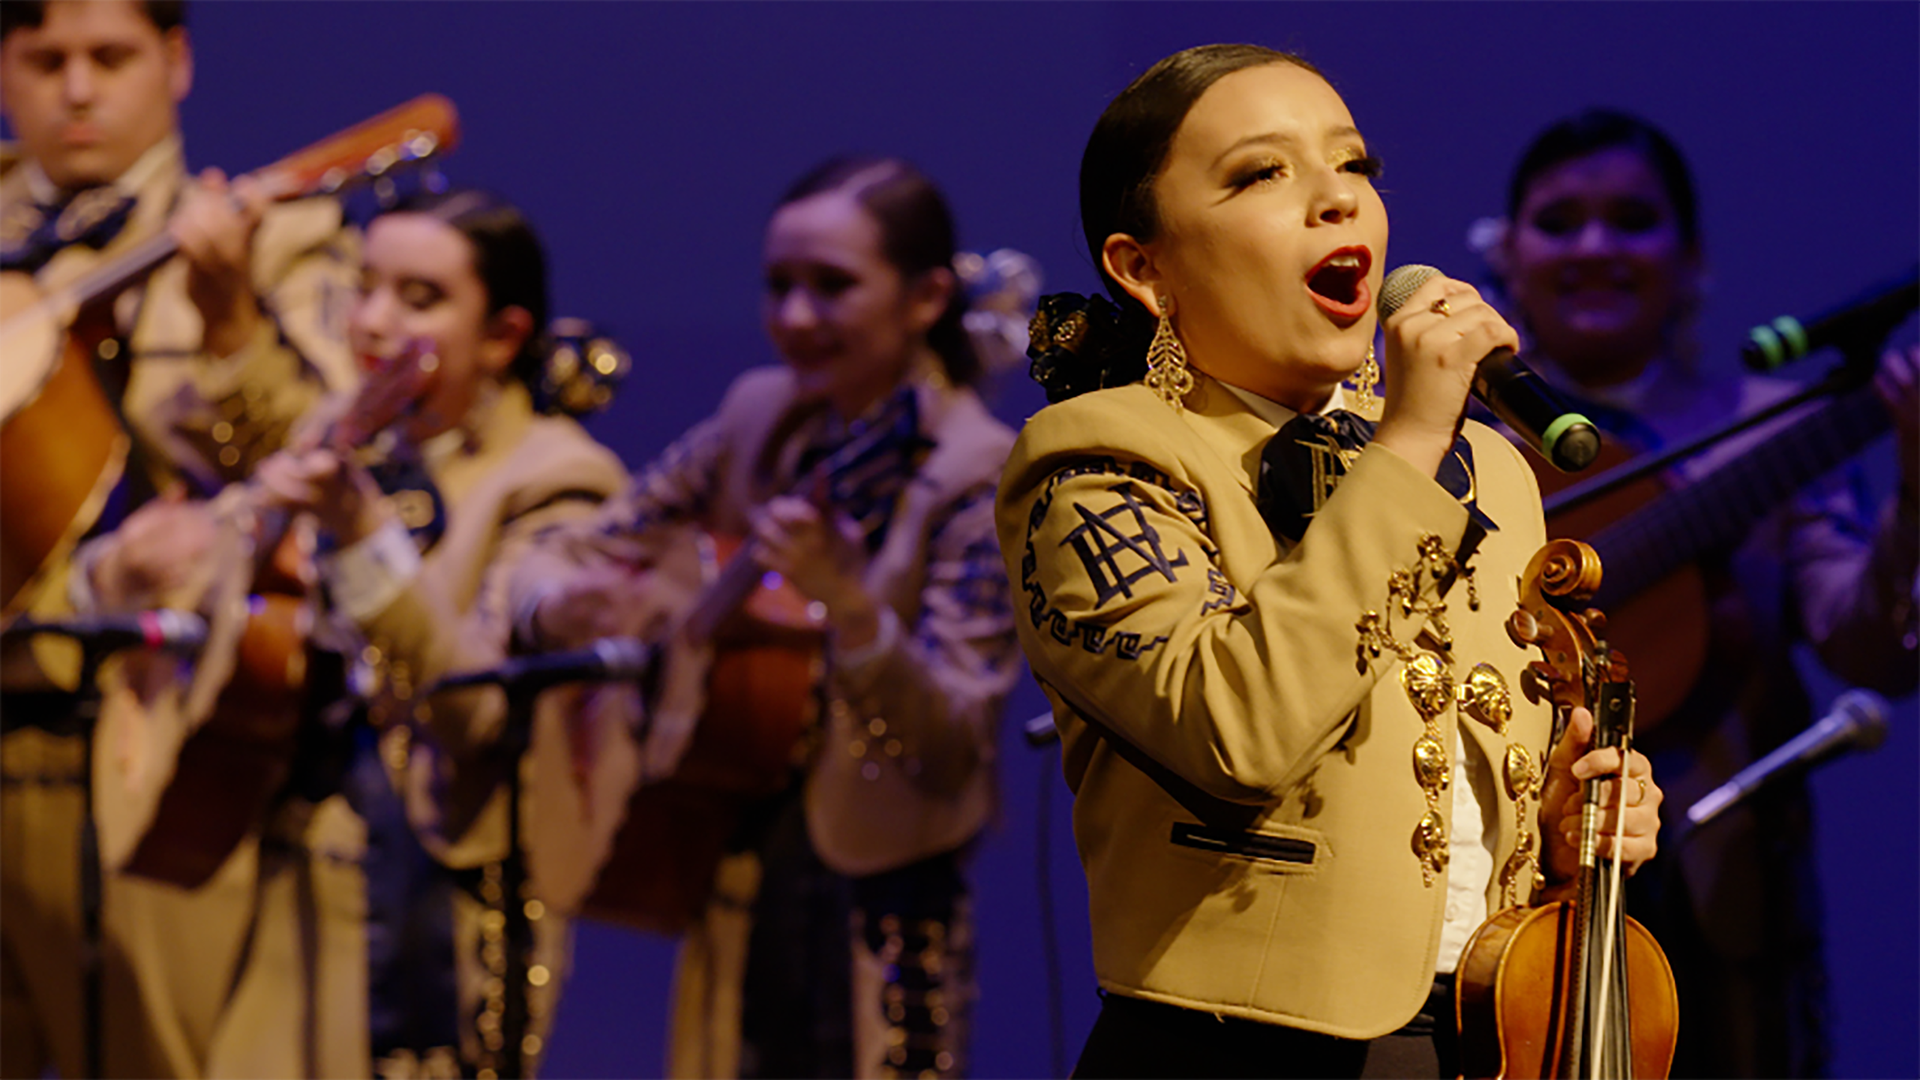 A high school mariachi band performing on stage.